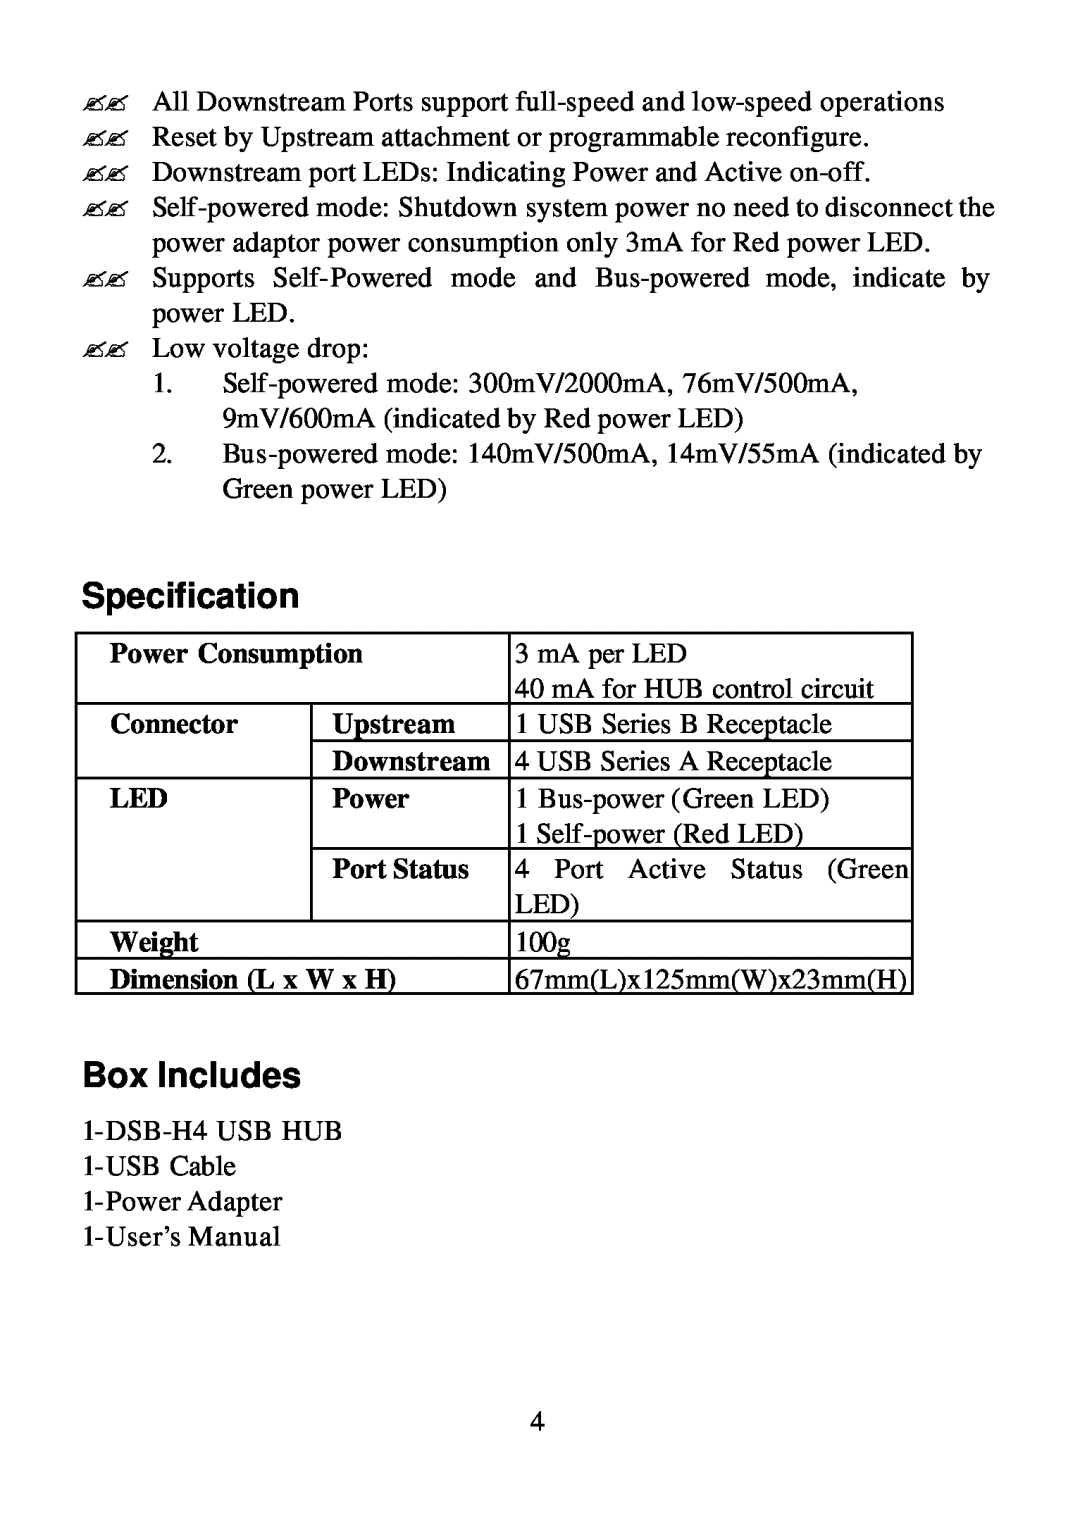 D-Link DSB-H4 Specification, Box Includes, Power Consumption, Connector, Upstream, Downstream, Port Status, Weight 